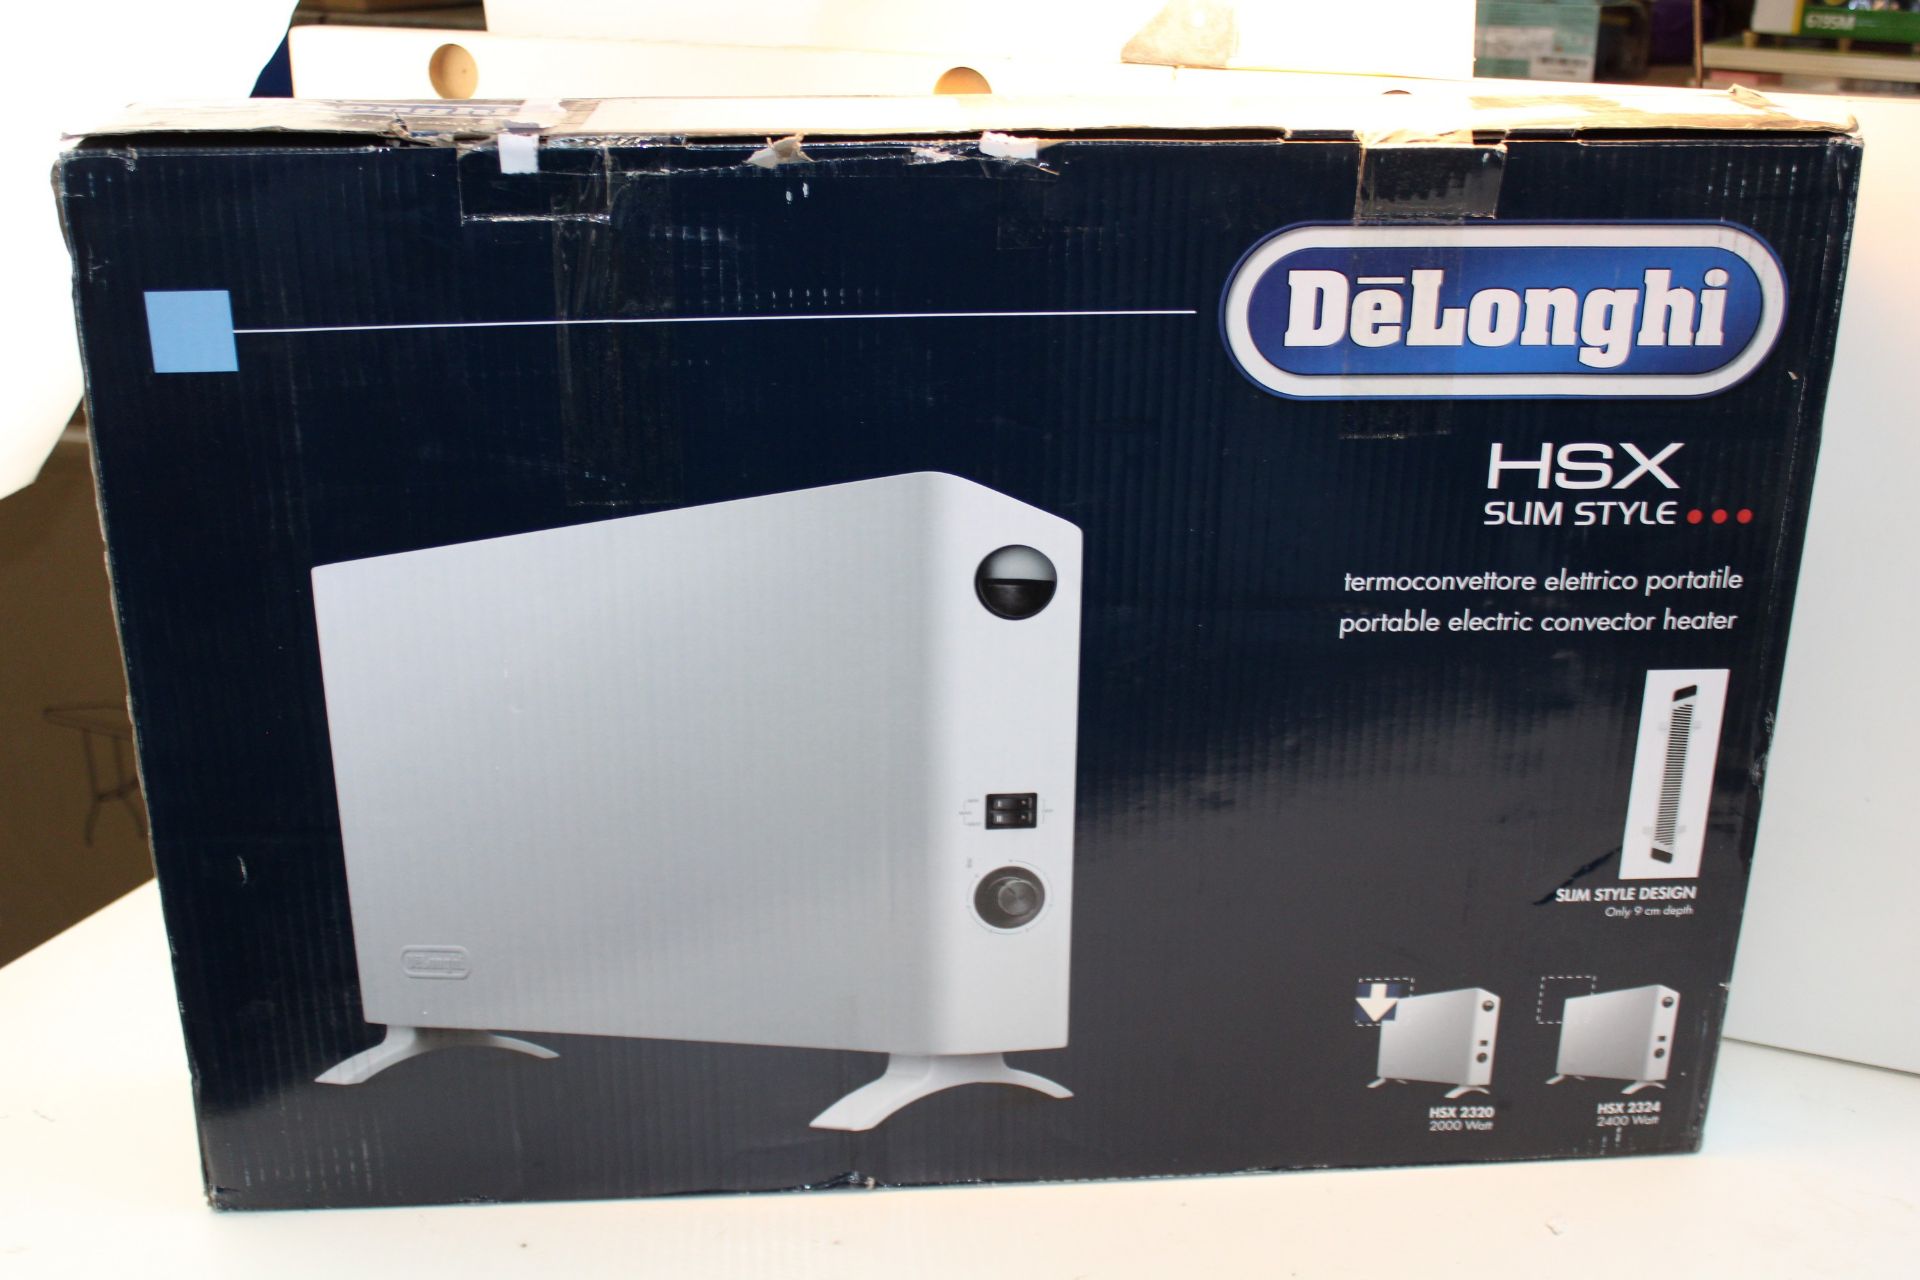 BOXED DELONGHI HSX SLIM STYLE PORTABLE ELECTRIC CONVECTOR HEATER RRP £69.99Condition ReportAppraisal